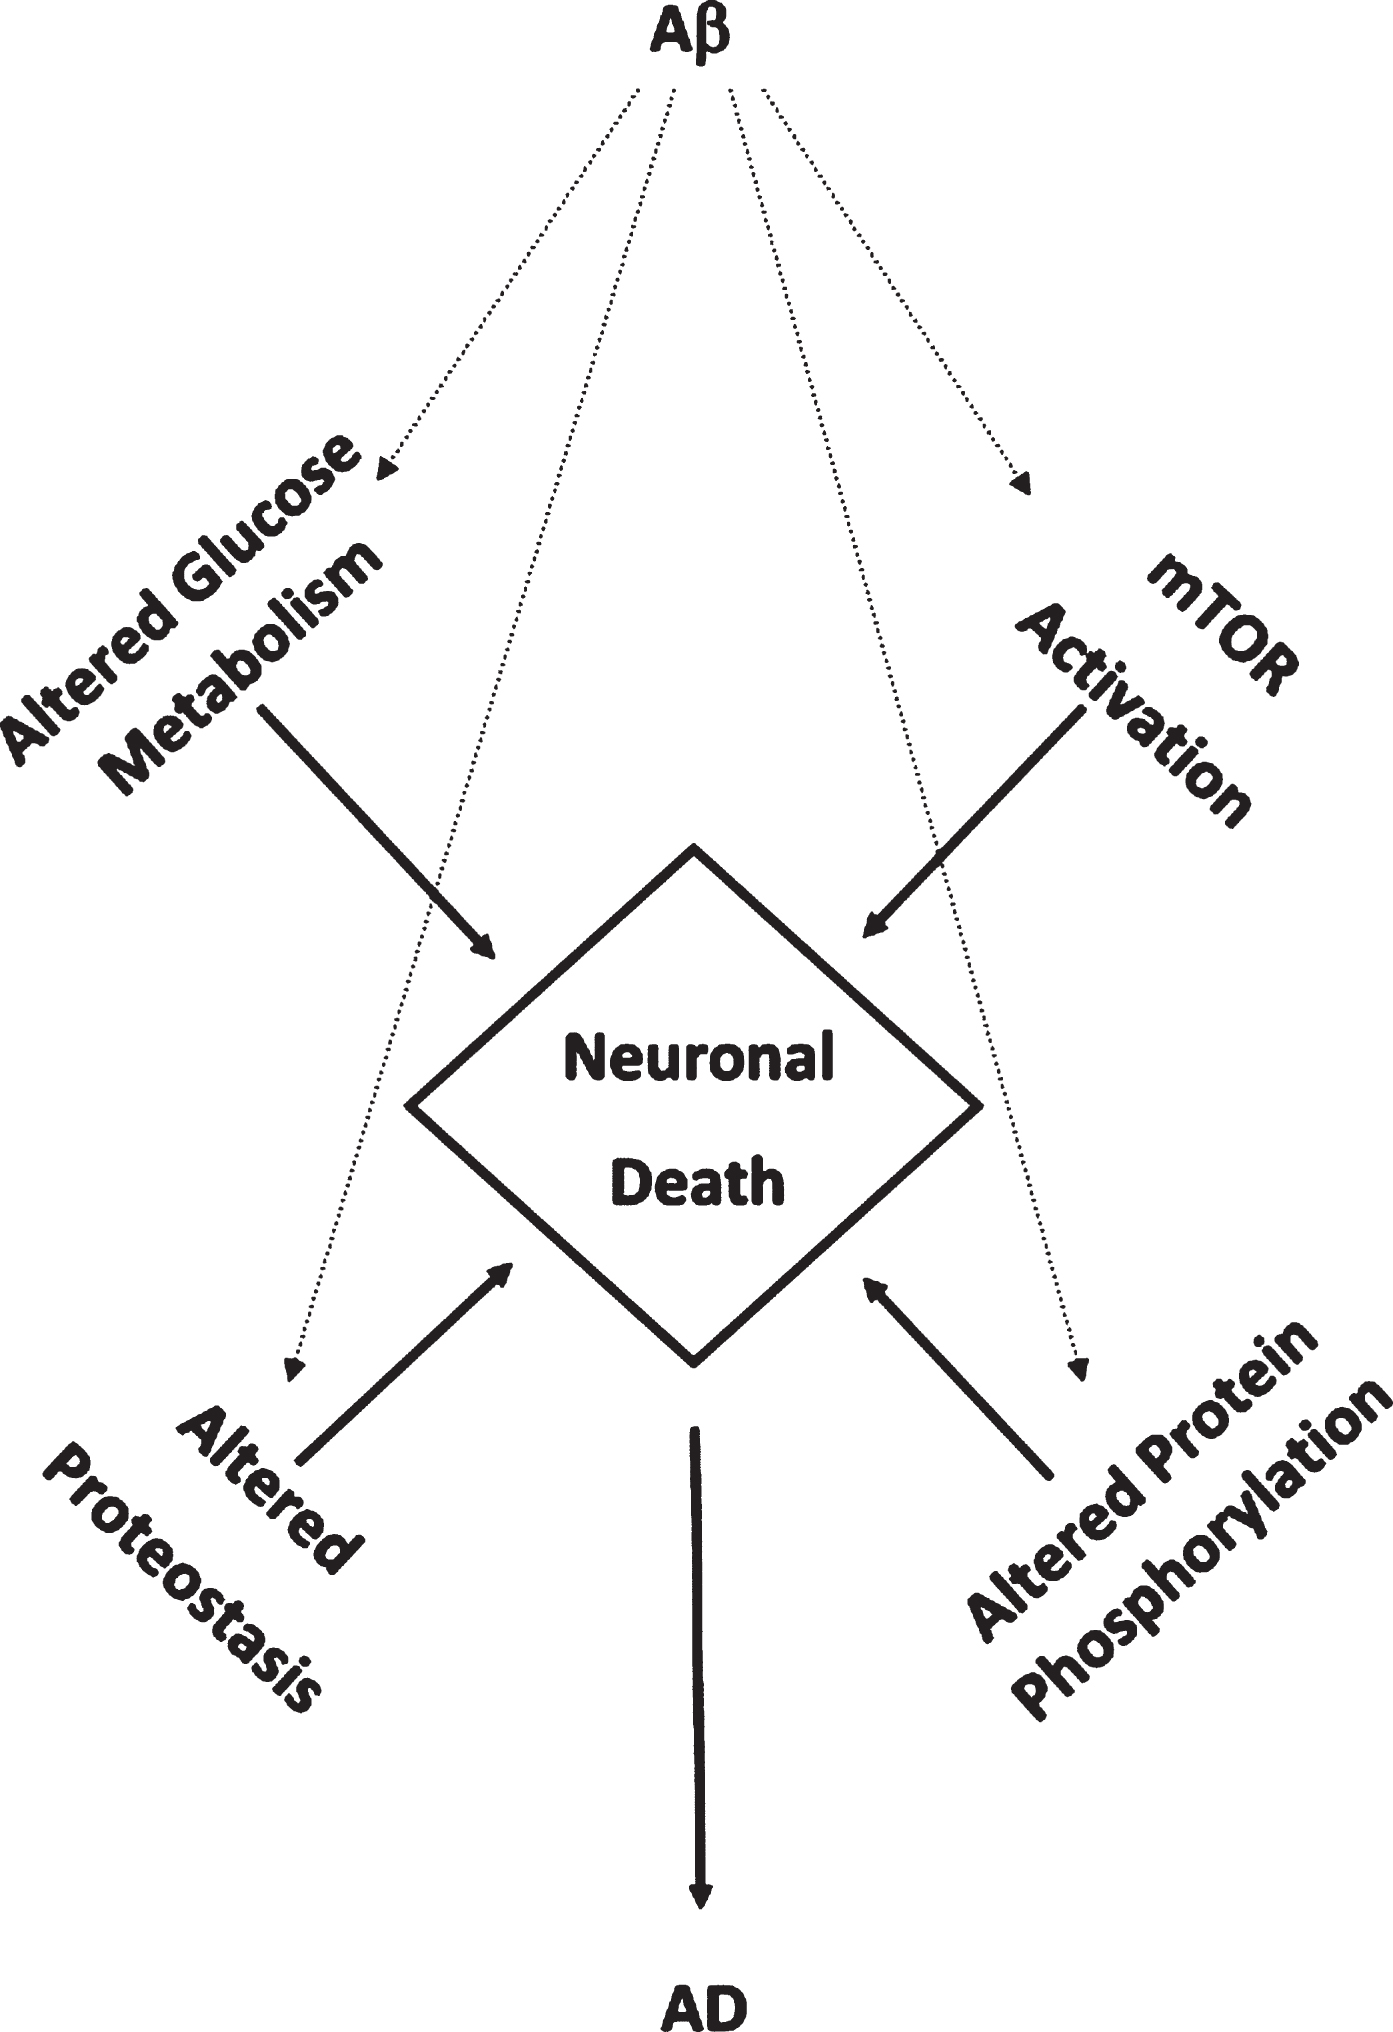 Aβ1-42-mediates accumulated oxidative damage resulting in decreased glucose metabolism, mTOR activation, altered protein homeostasis, and altered protein phosphorylation leading in neuronal death in aMCI and AD brain.